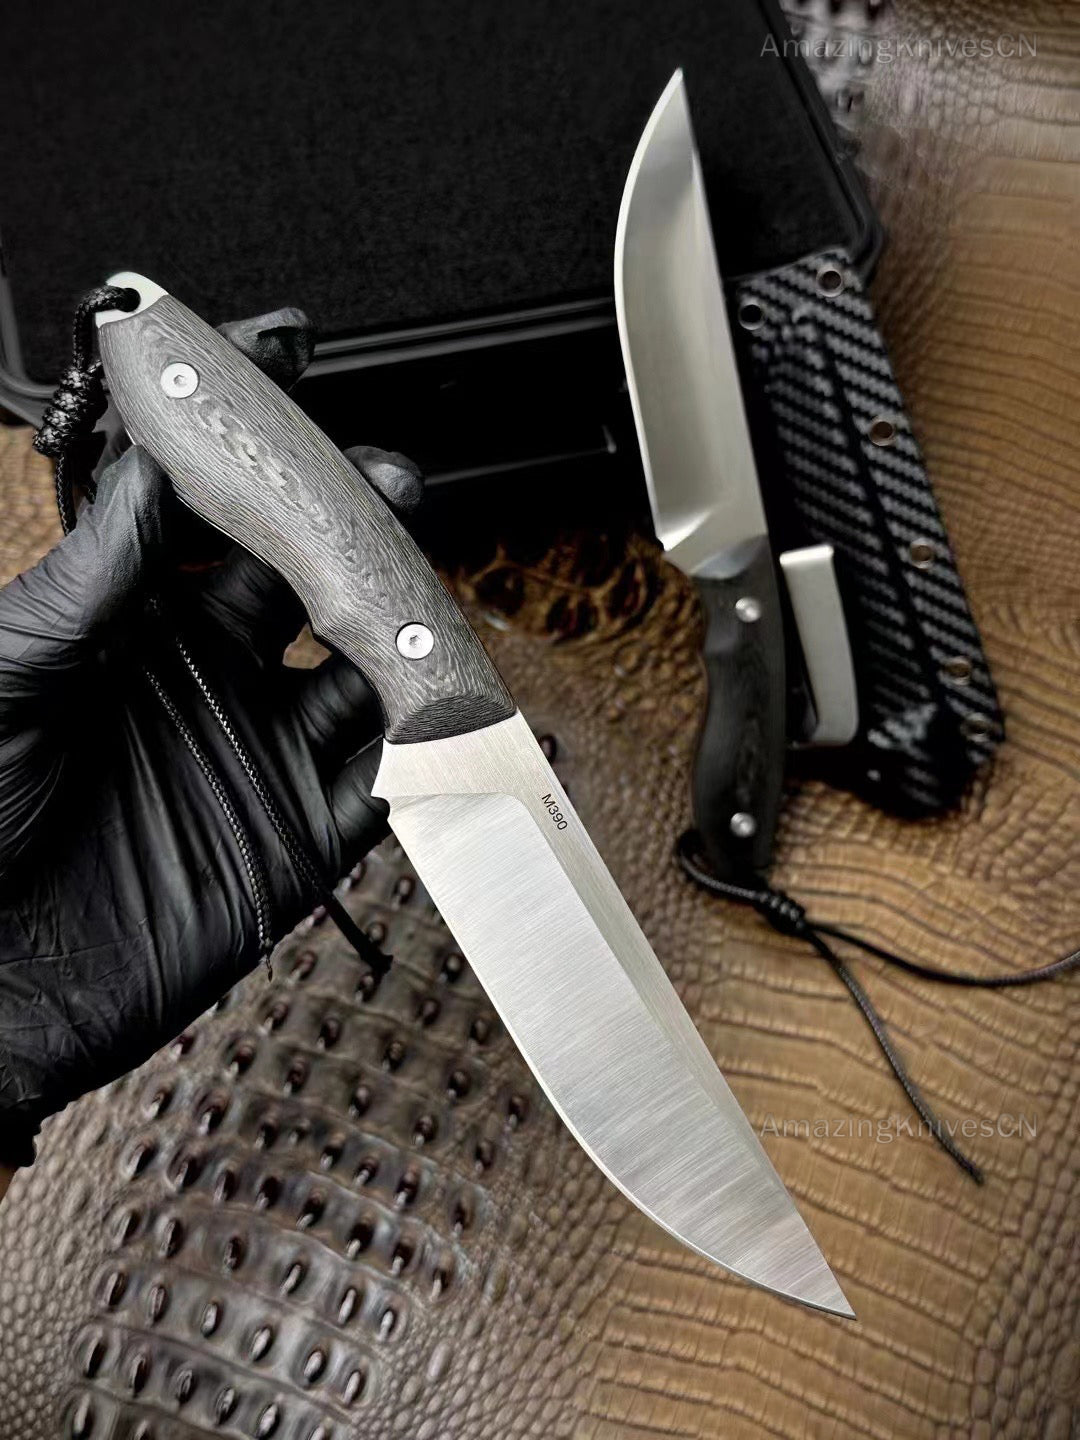 Full Tang M390 Steel Hunting Knife Bowie Fixed Blade Carbon Fiber Handle with Kydex Sheath - AK-HT0875